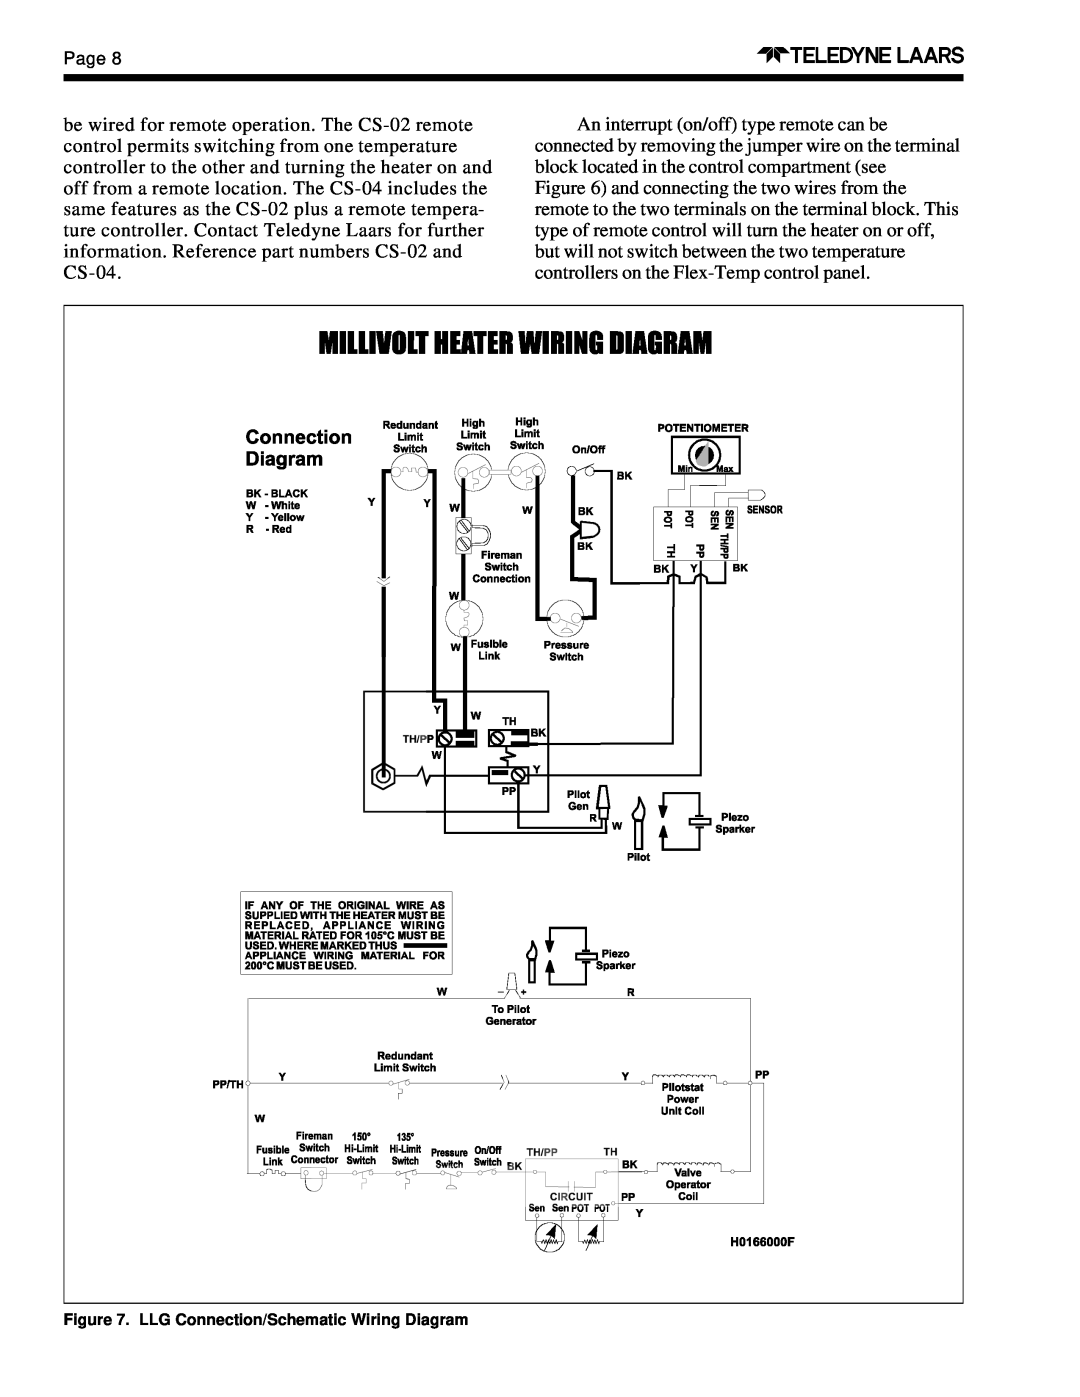 Teledyne LLD dimensions LLG Connection/Schematic Wiring Diagram 